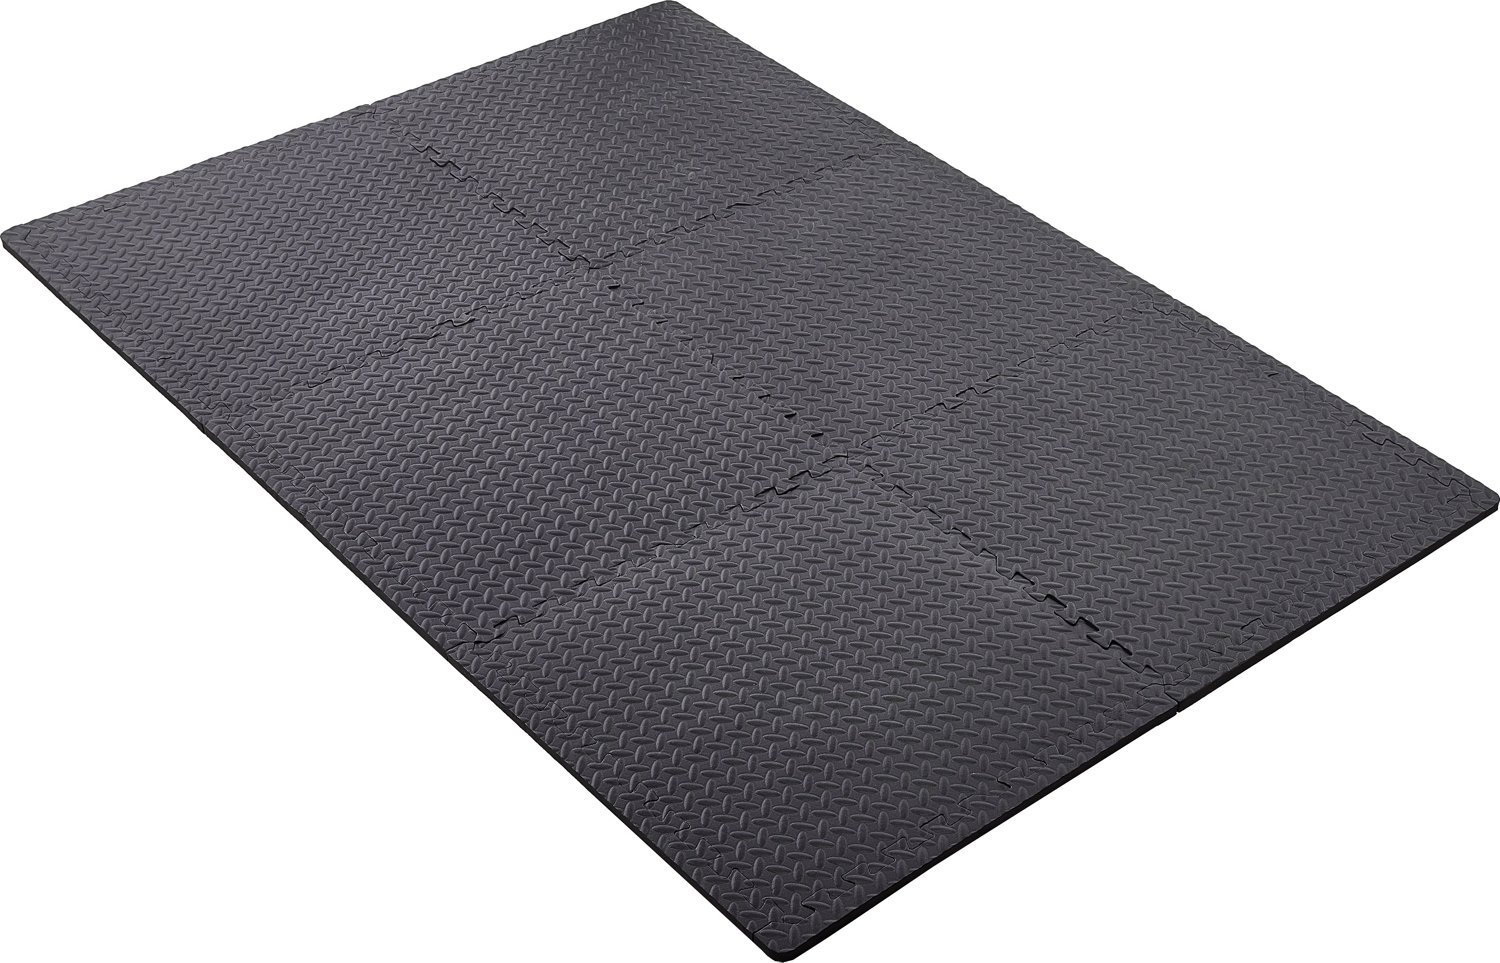 Training Mats, Covers & Sports Products Michigan